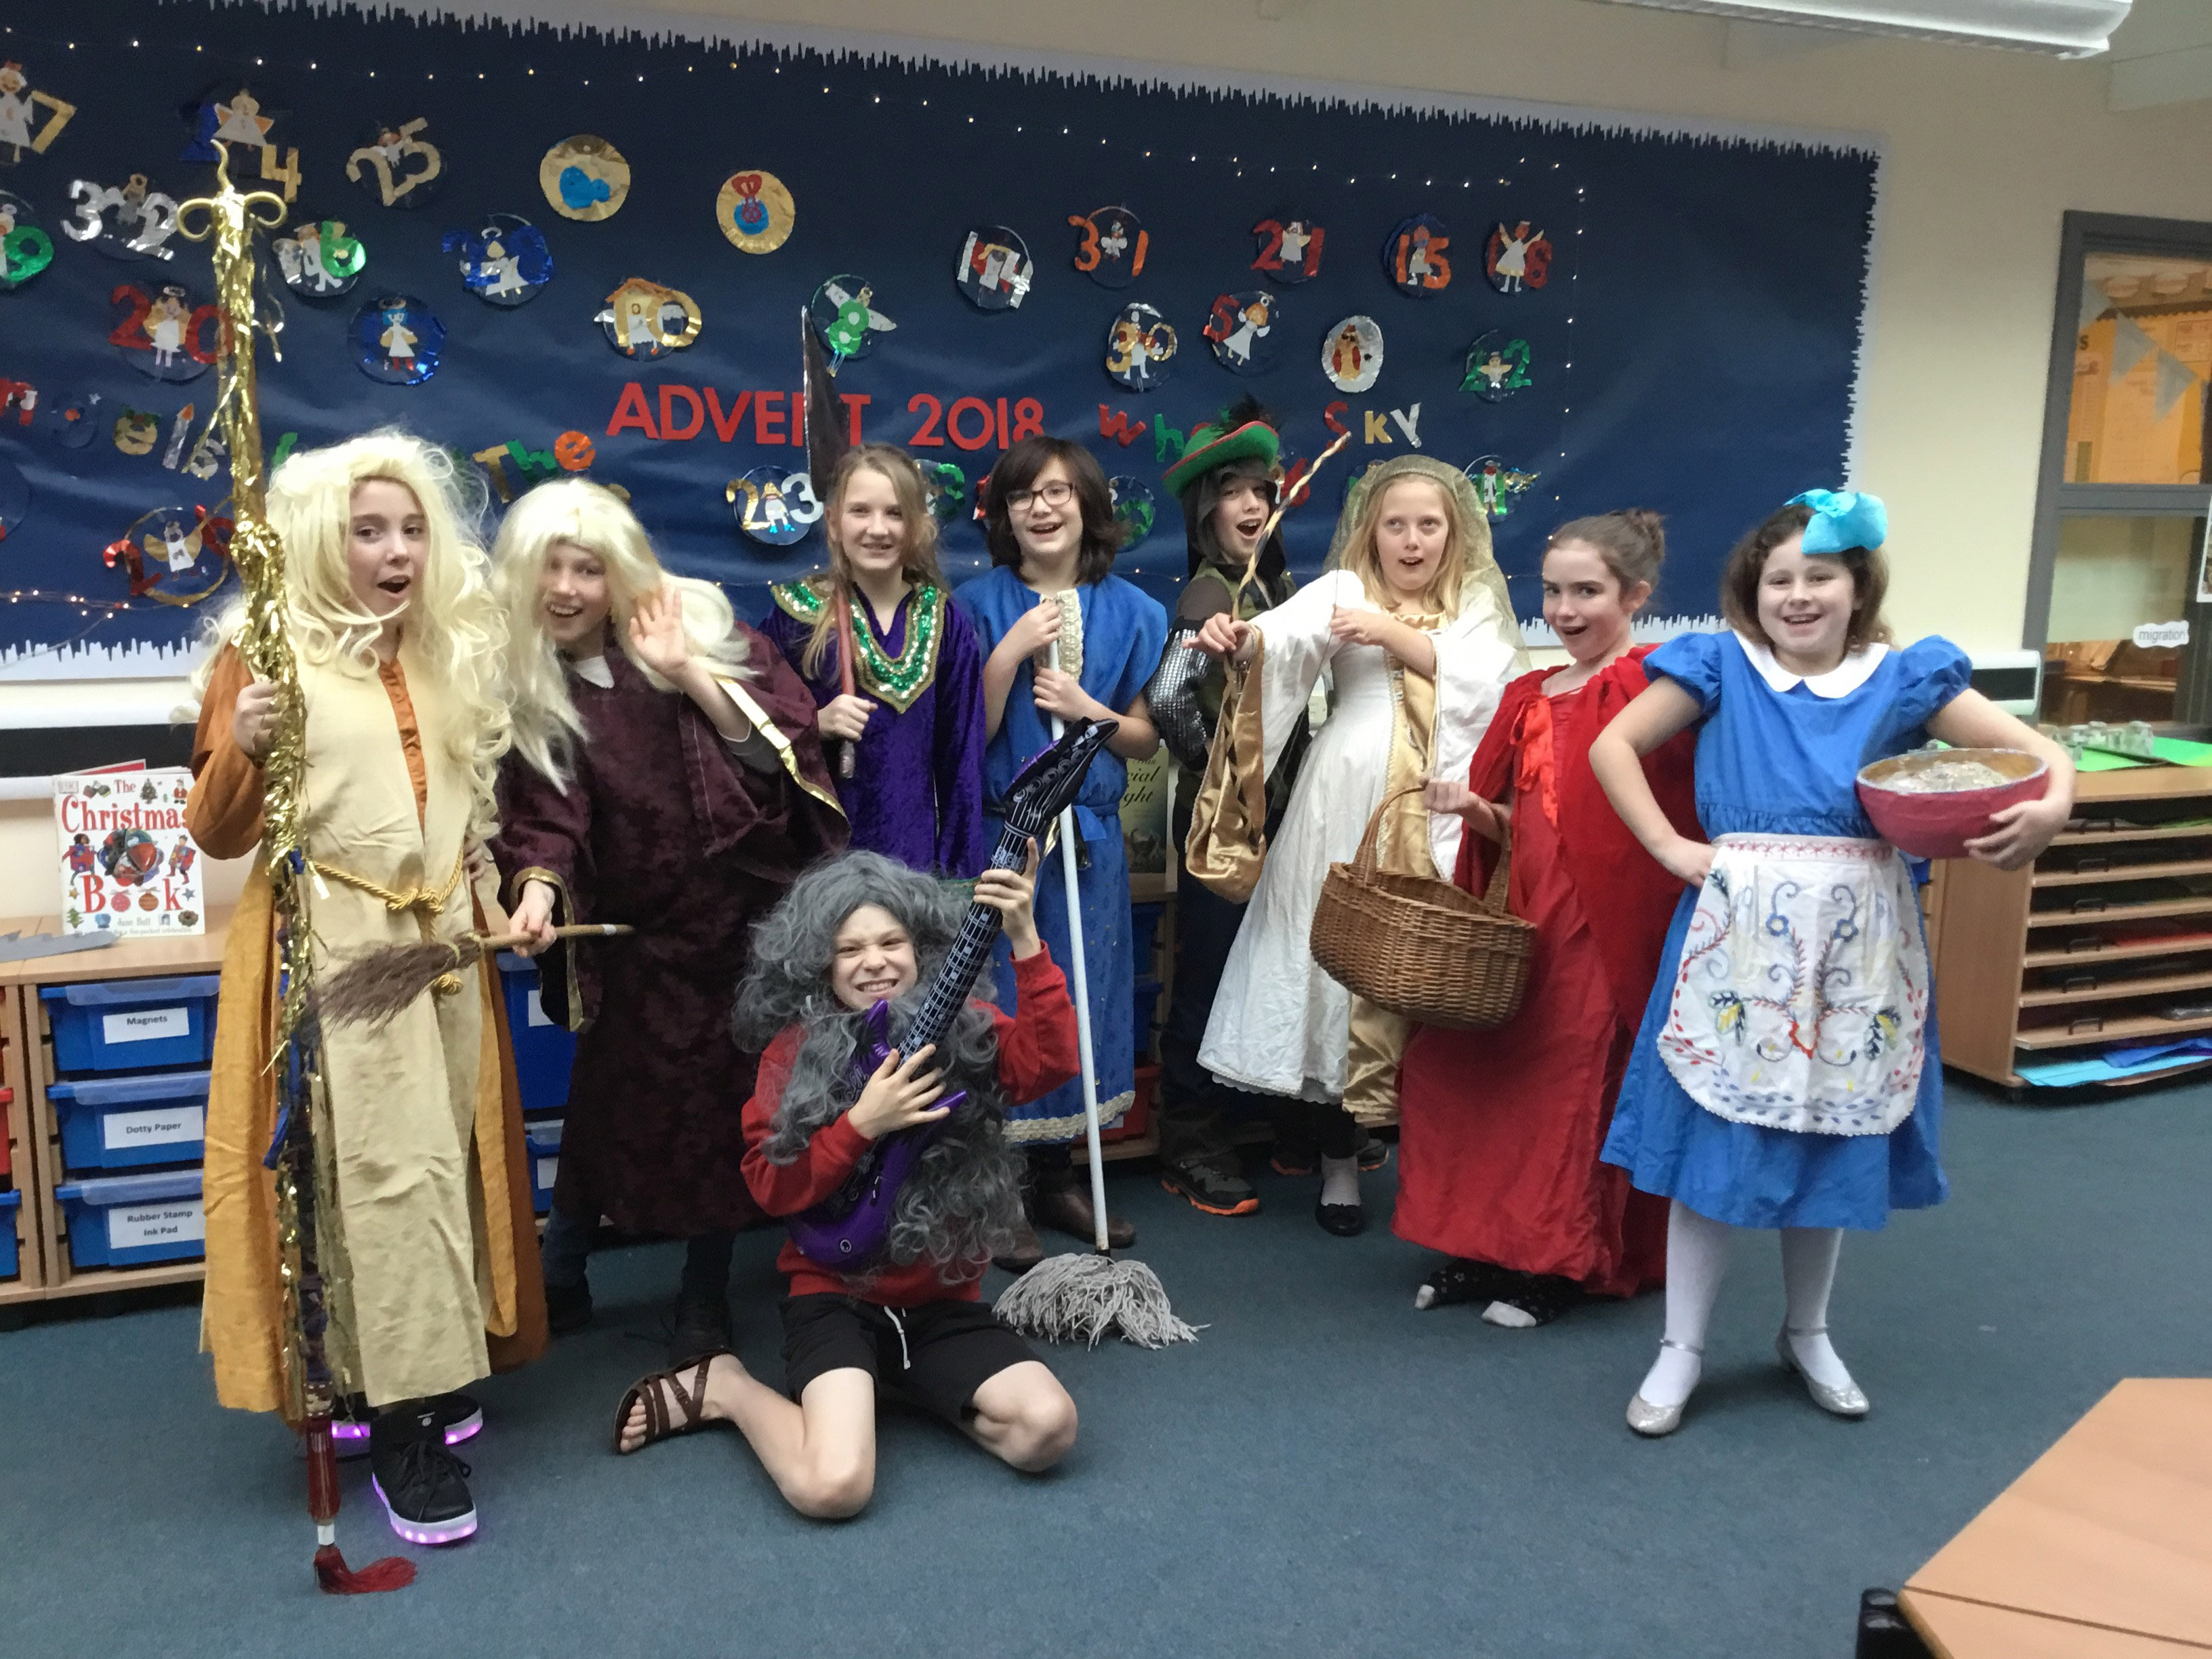 Robin Hood, Snow White and Noah – oh yes it is!